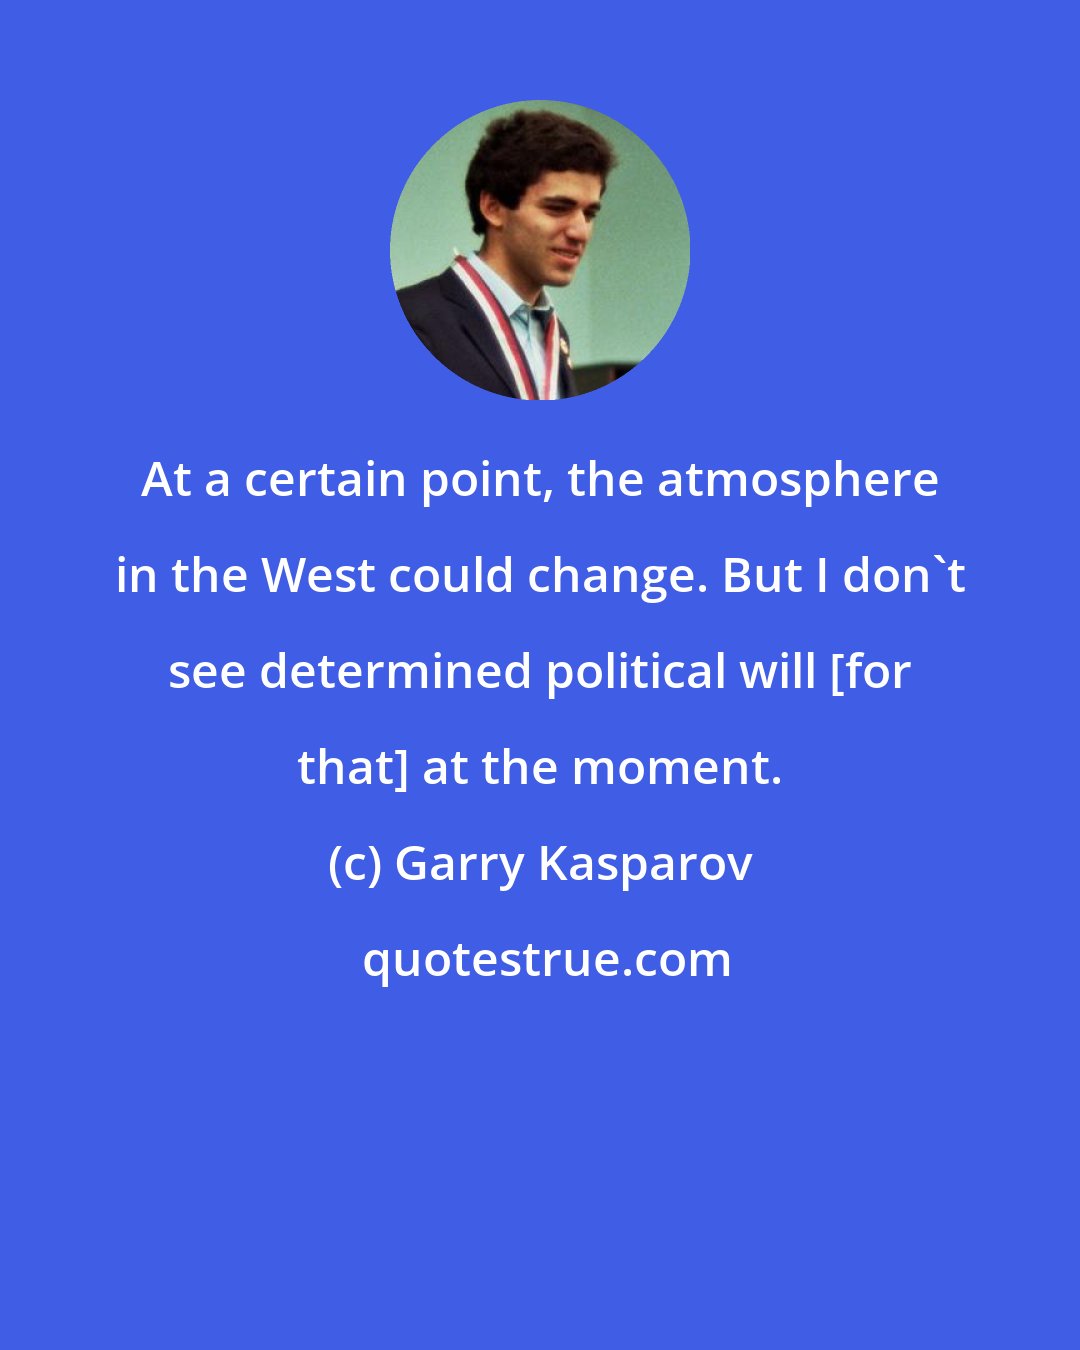 Garry Kasparov: At a certain point, the atmosphere in the West could change. But I don't see determined political will [for that] at the moment.